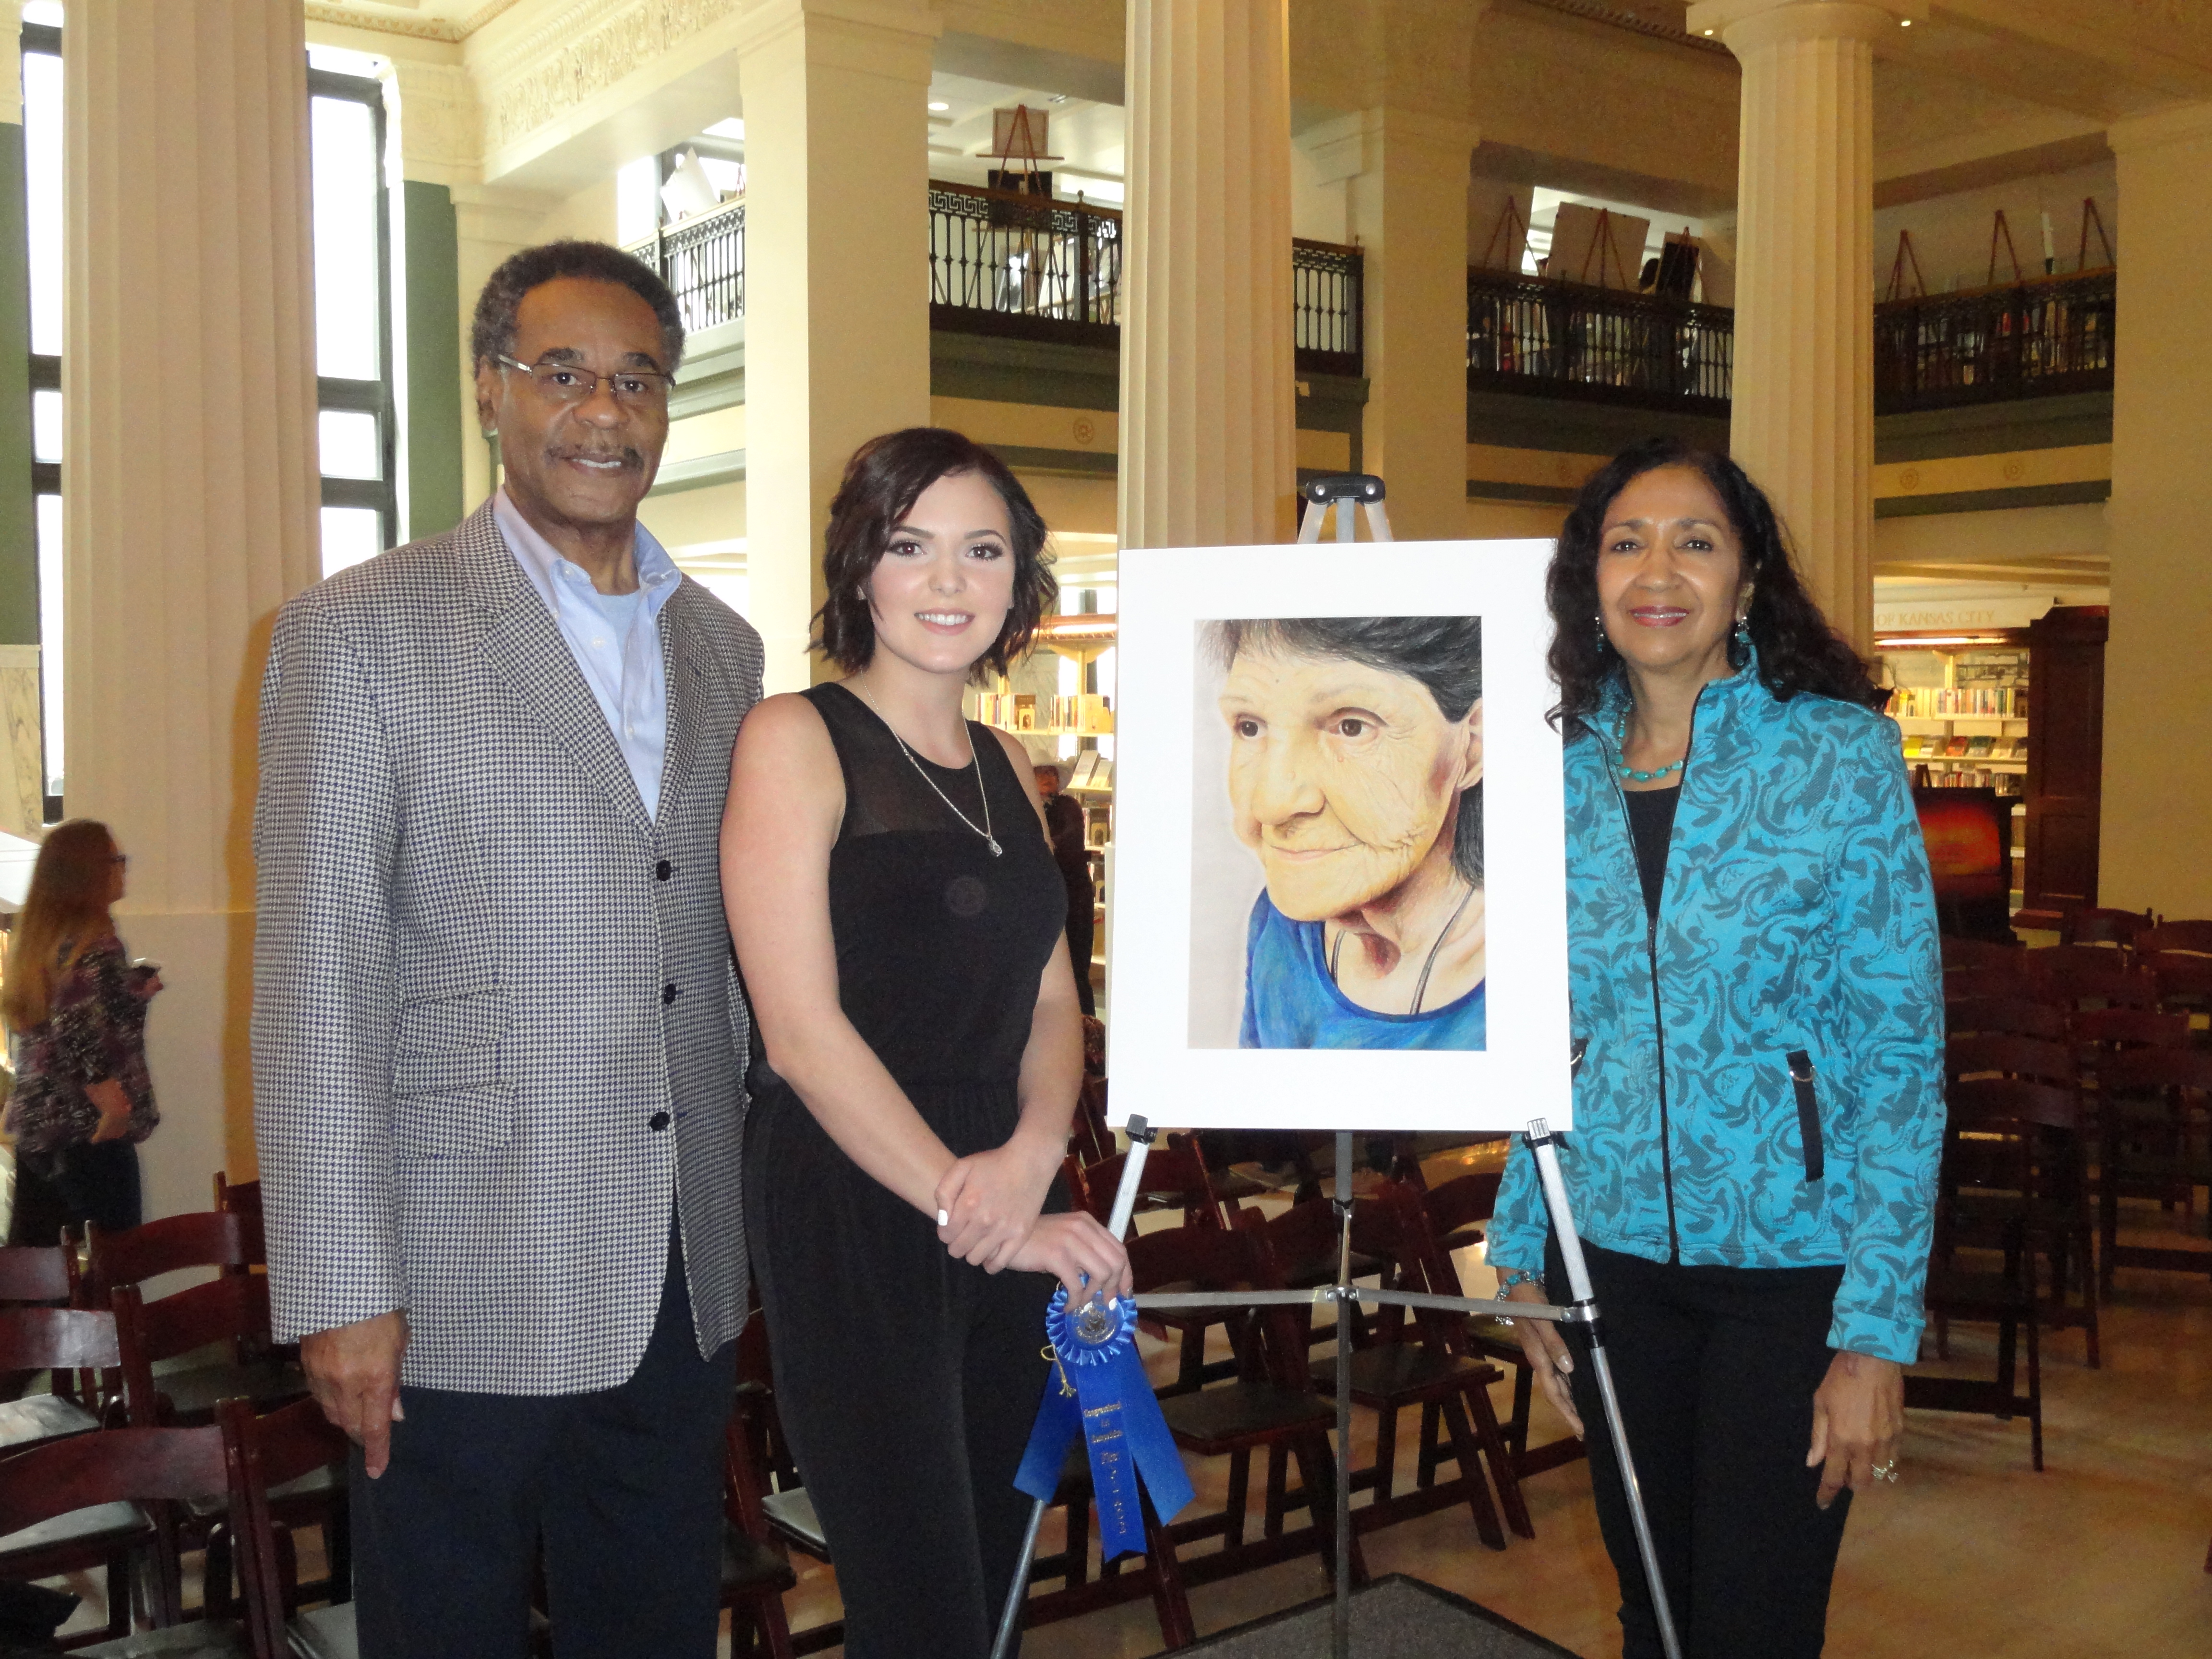 Annabelle Cash of Blue Springs High School Student wins top award for art entry